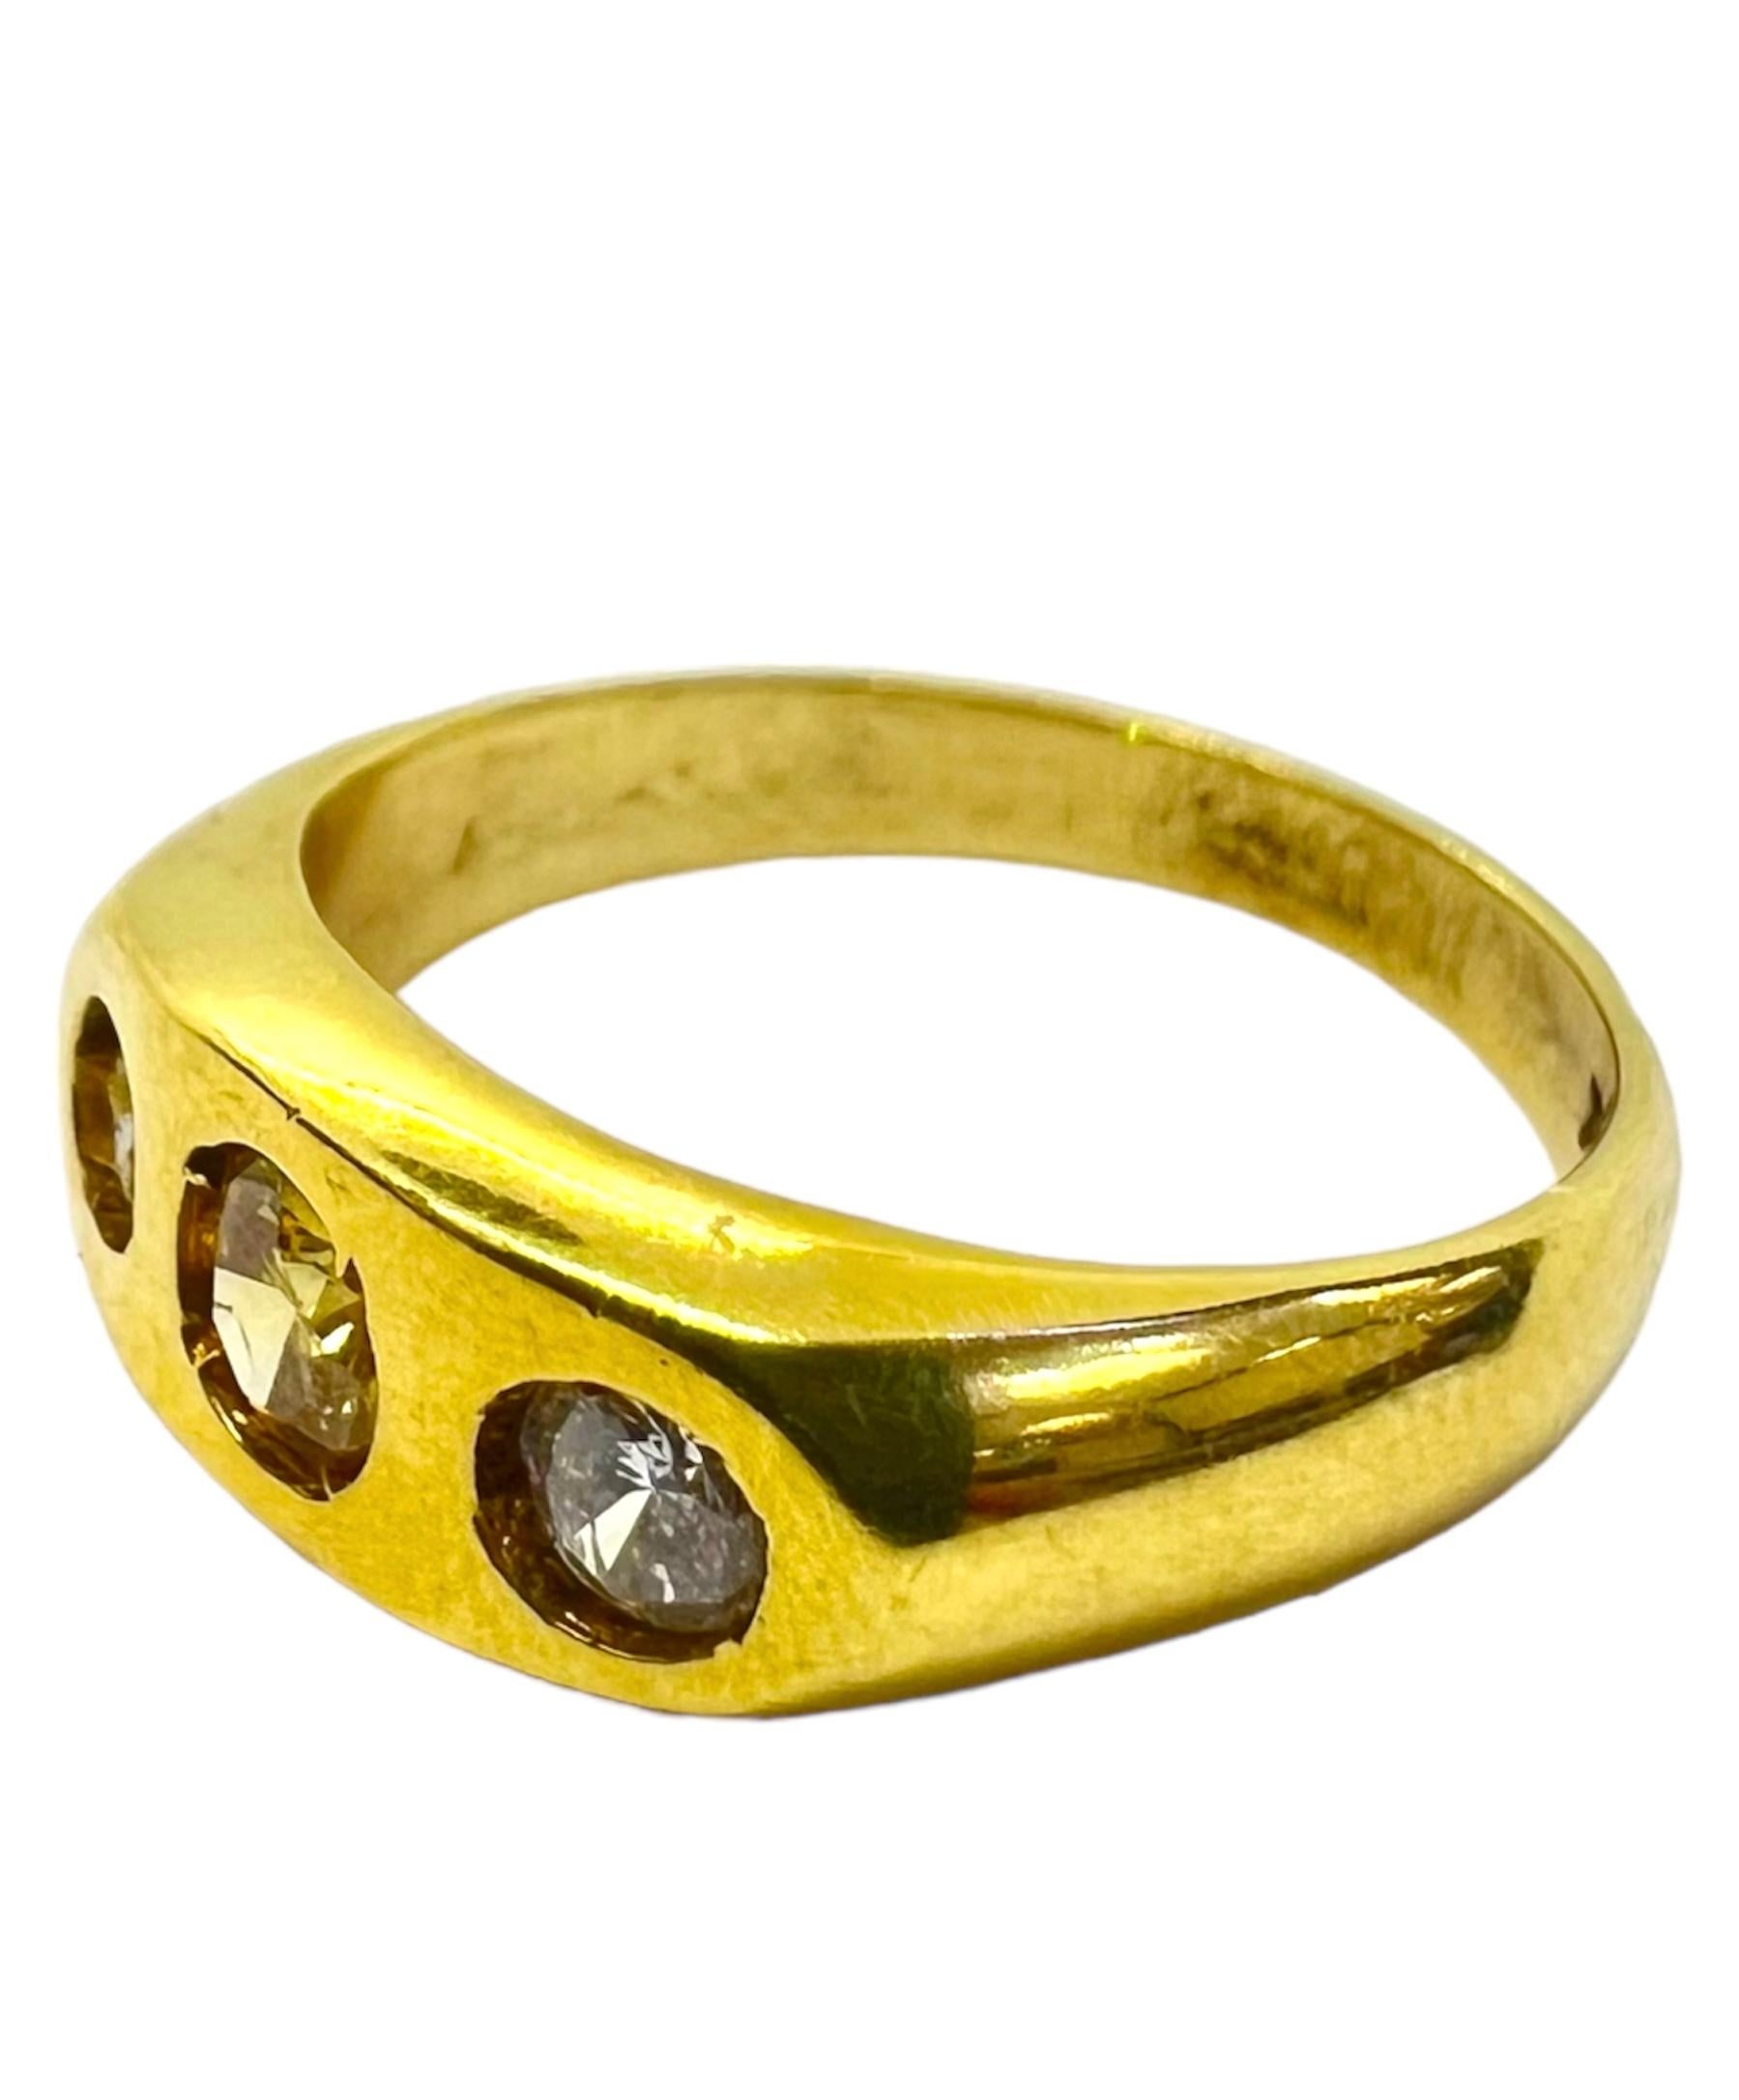 18K yellow gold ring with white diamonds and yellow diamond.

Sophia D by Joseph Dardashti LTD has been known worldwide for 35 years and are inspired by classic Art Deco design that merges with modern manufacturing techniques. 